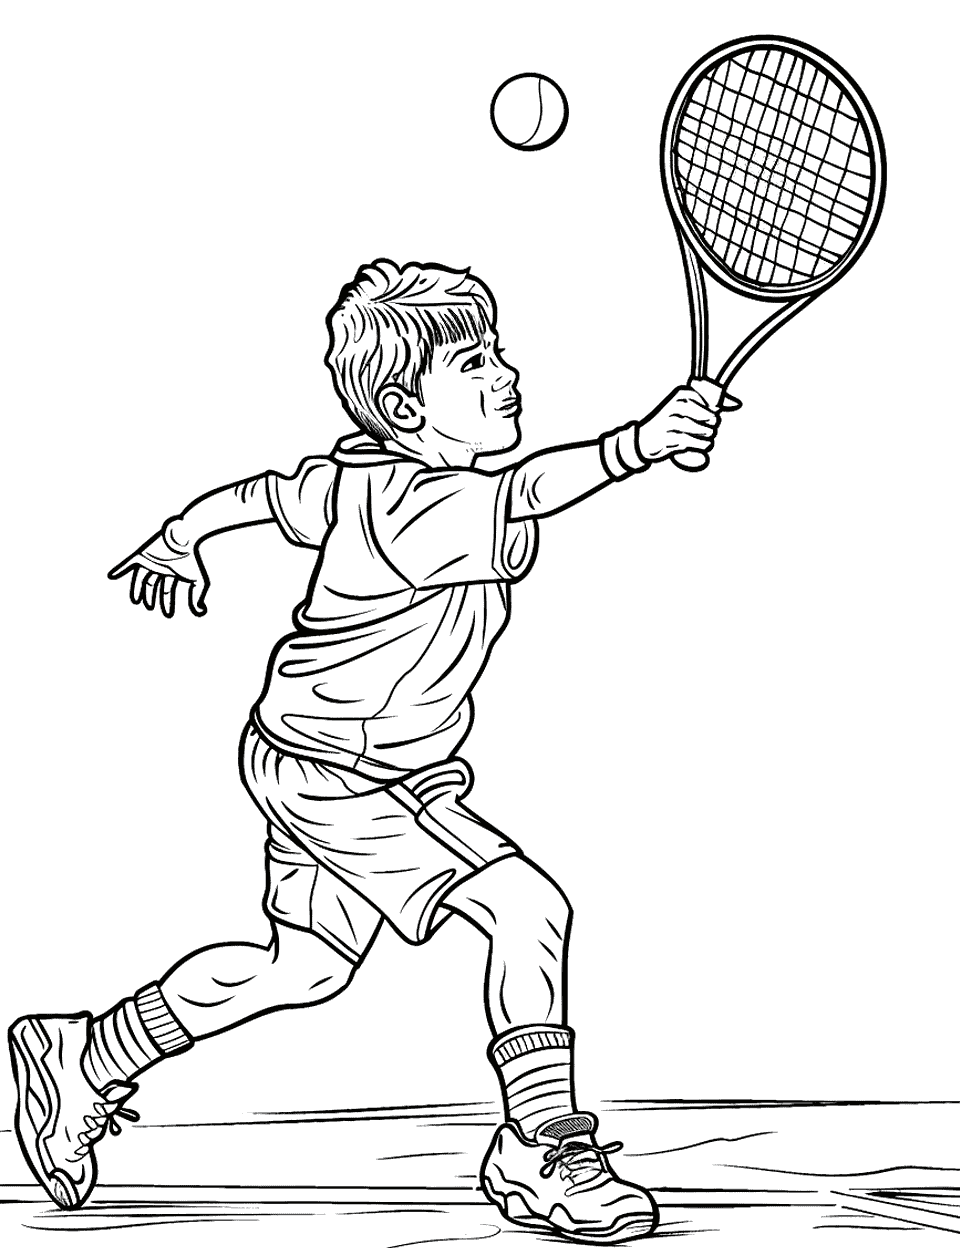 Tennis Match Sports Coloring Page - A tennis player playing tennis ready to return the tennis ball to his opponent.